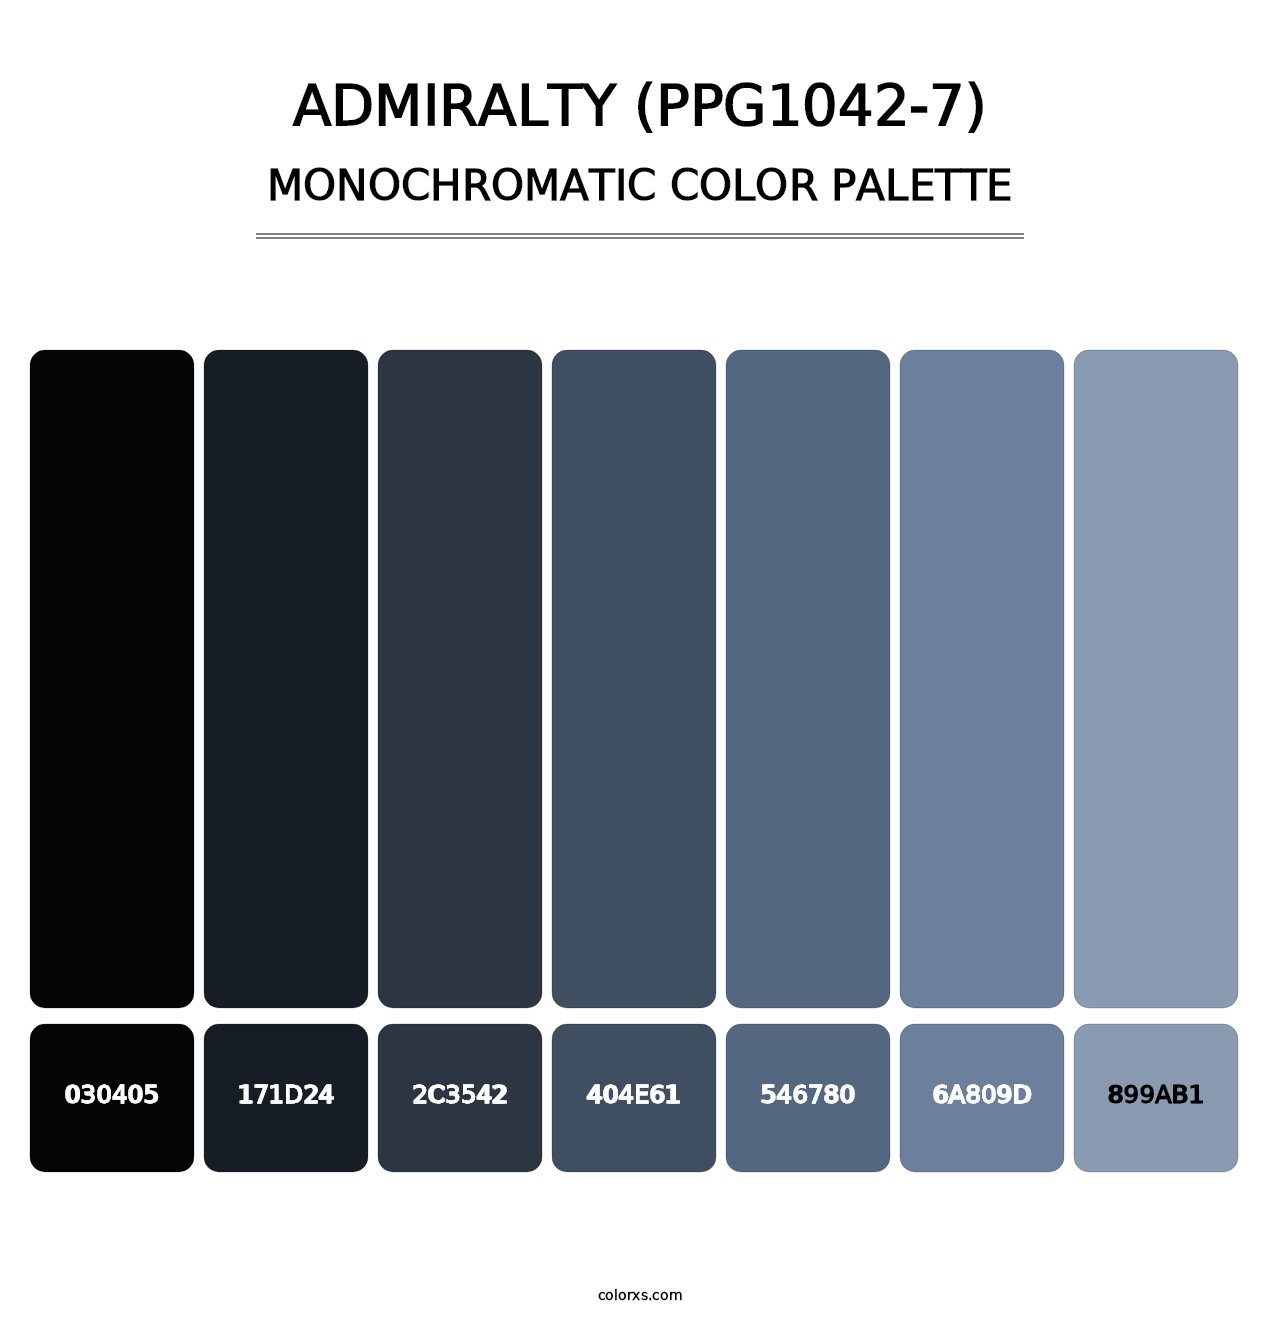 Admiralty (PPG1042-7) - Monochromatic Color Palette